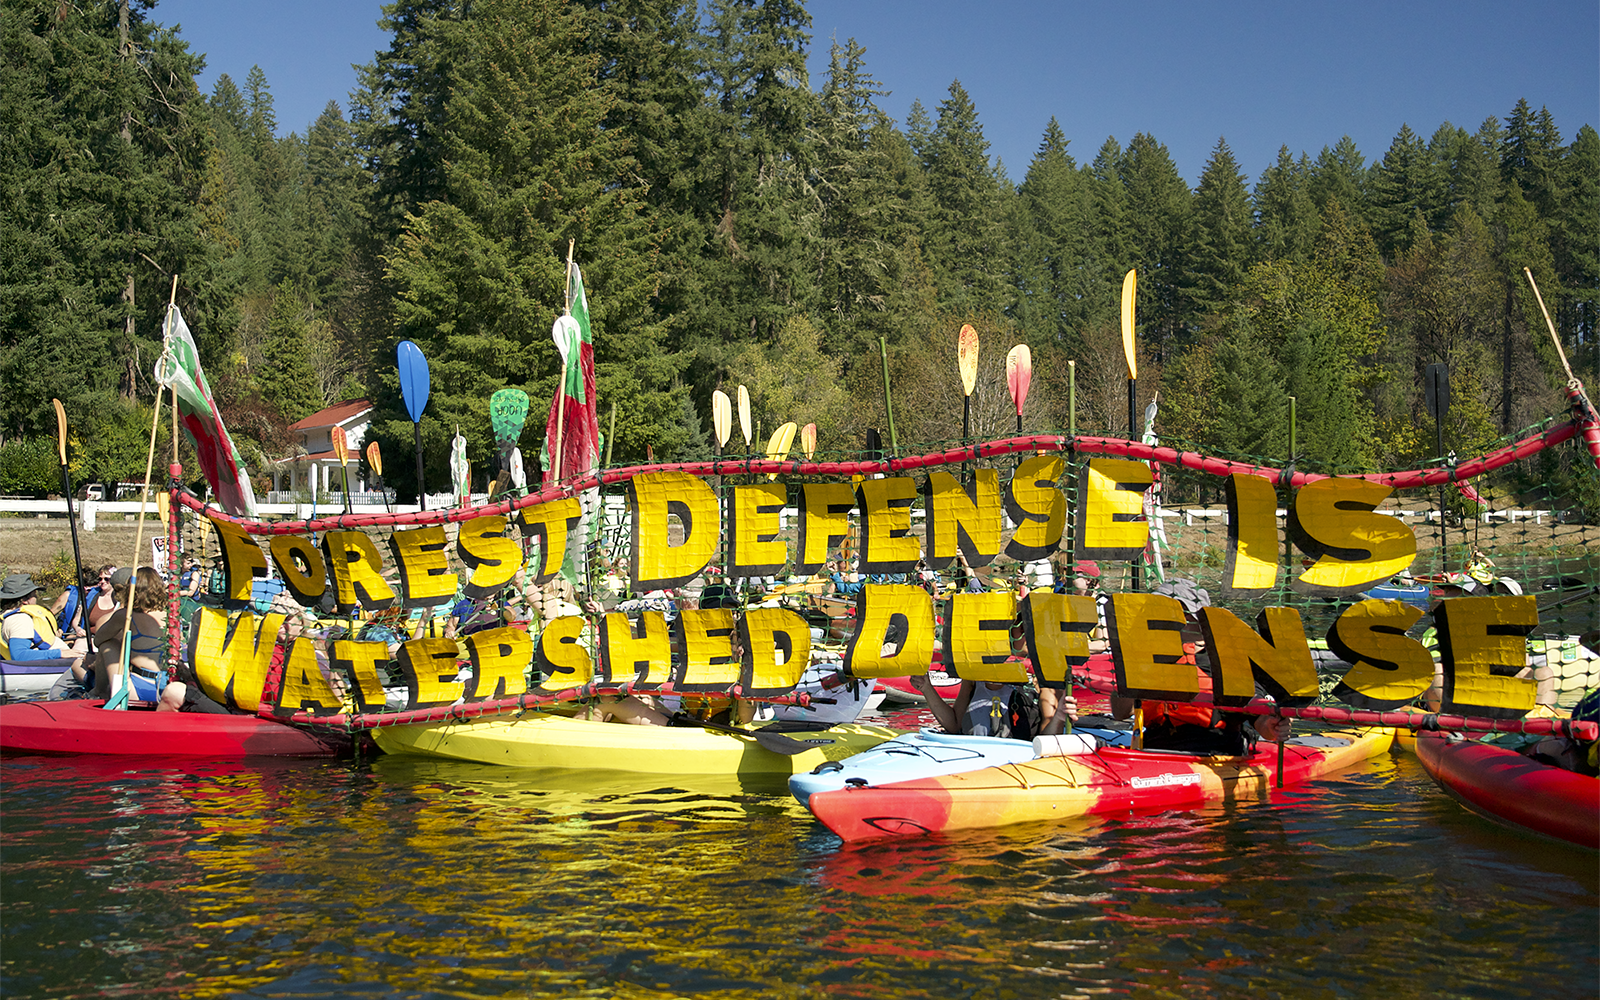 Press Release: Over 100 “Kayaktivists” and Community Members Protest Old-Growth Logging